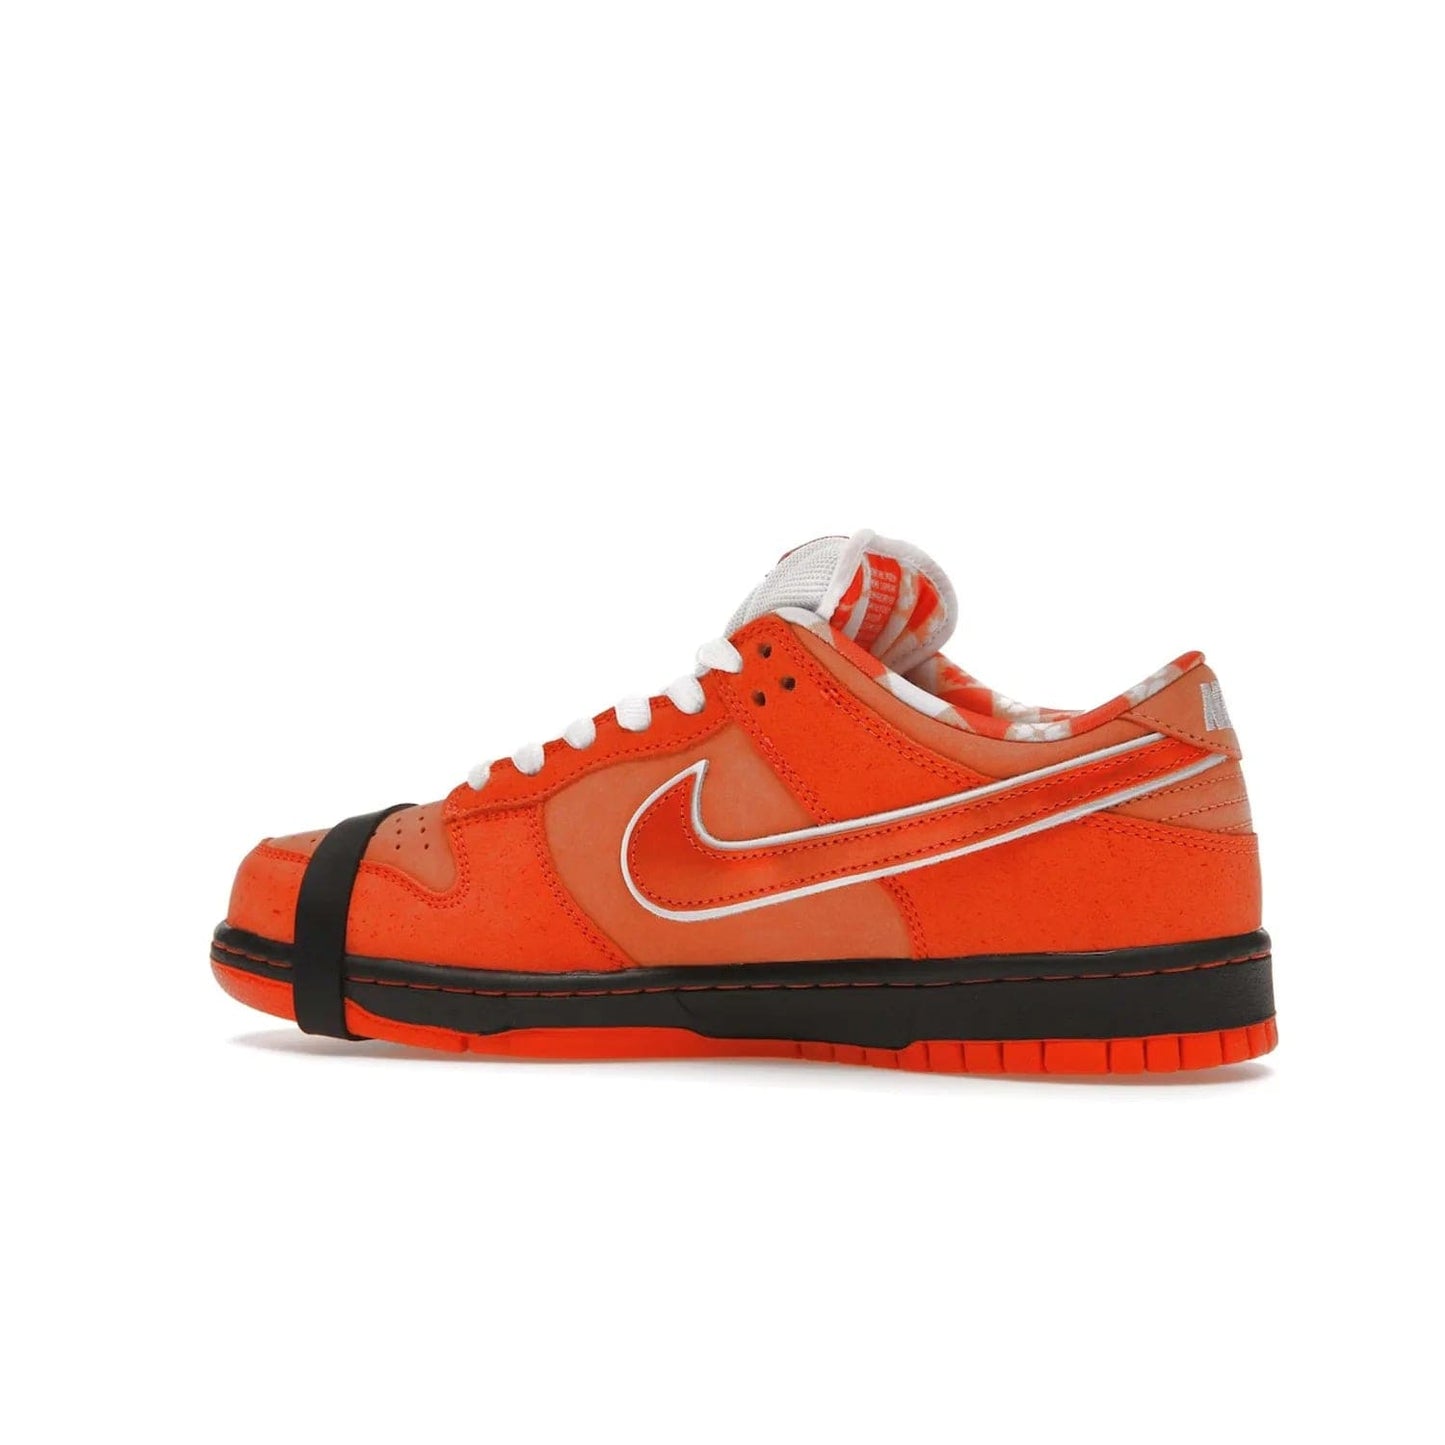 Nike SB Dunk Low Concepts Orange Lobster - Image 21 - Only at www.BallersClubKickz.com - Make a statement with the Nike SB Dunk Low Concepts Orange Lobster. Variety of orange hues, nubuck upper, bib-inspired lining & rubber outsole create bold look & comfortable blend of style. Available December 20th, 2022.